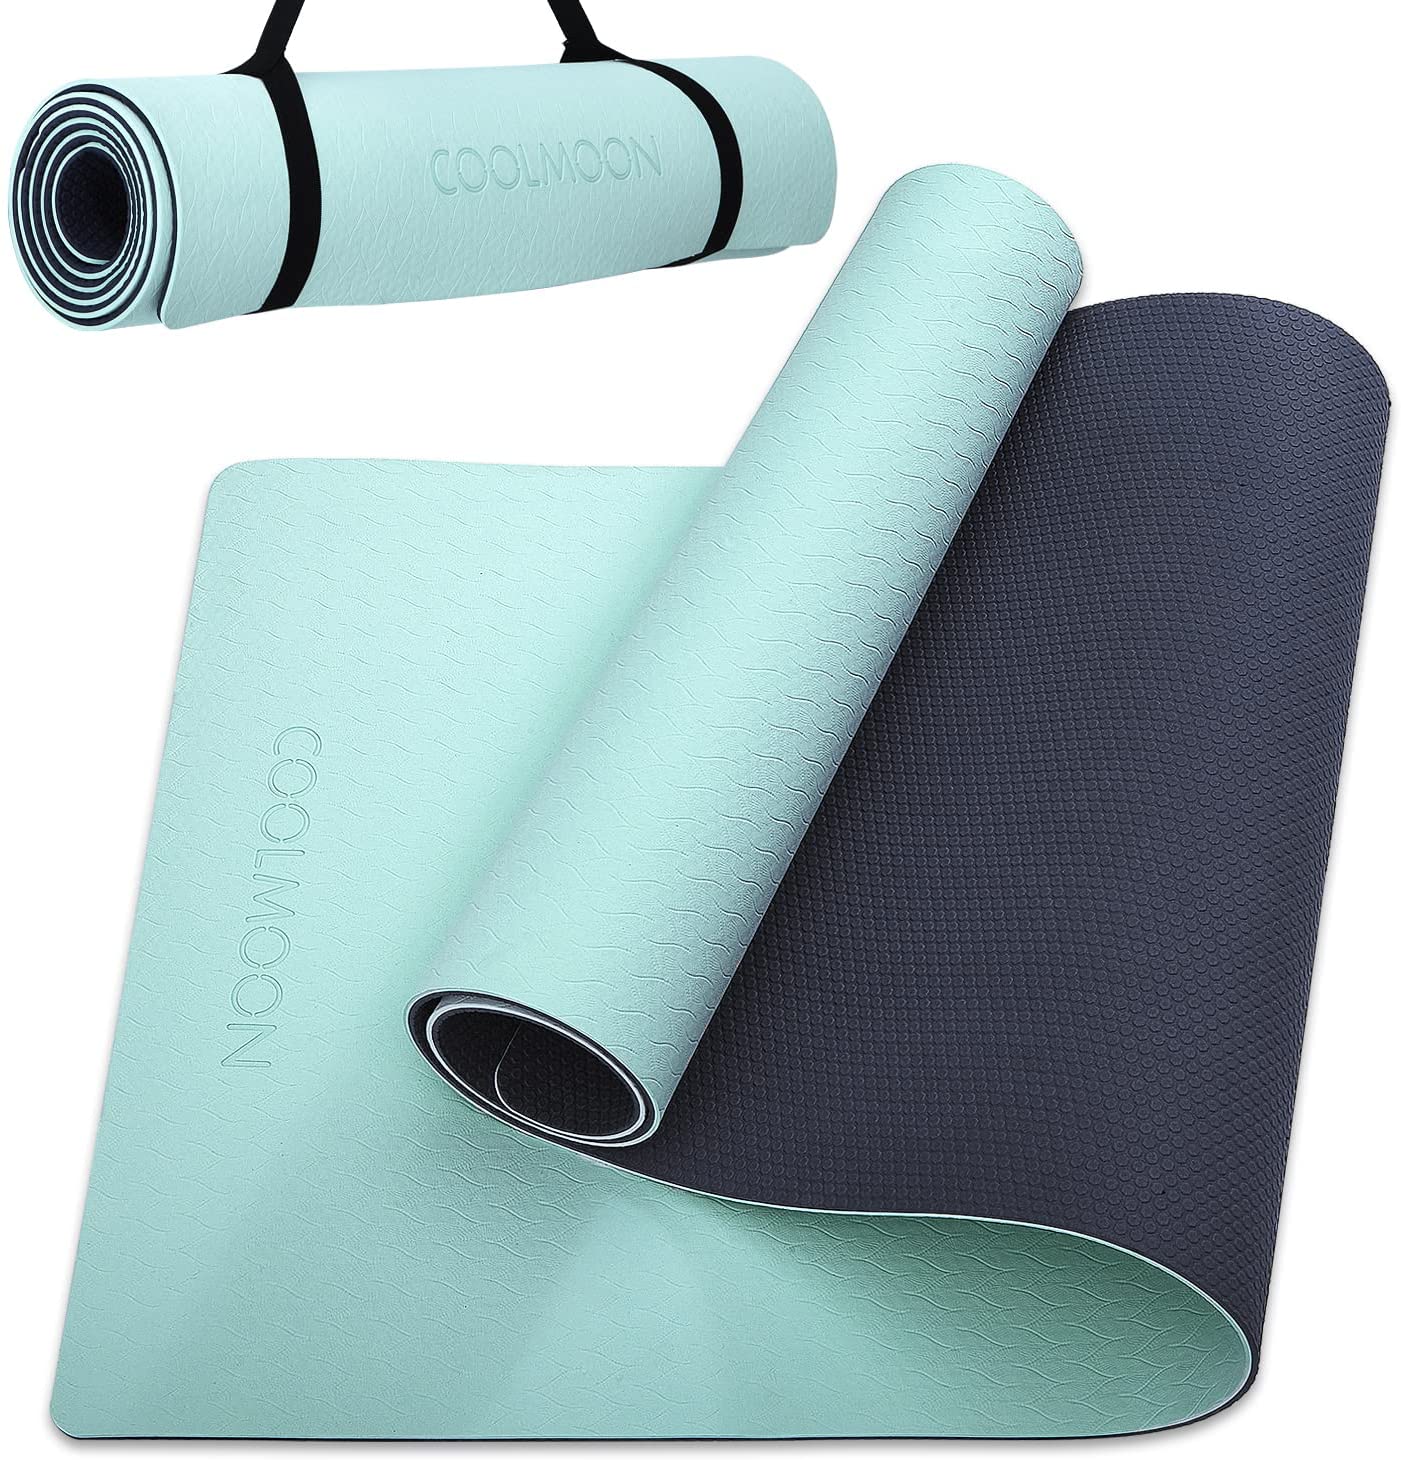 COOLMOON 1/4 Inch Extra Thick Yoga Mat Double-Sided Non Slip